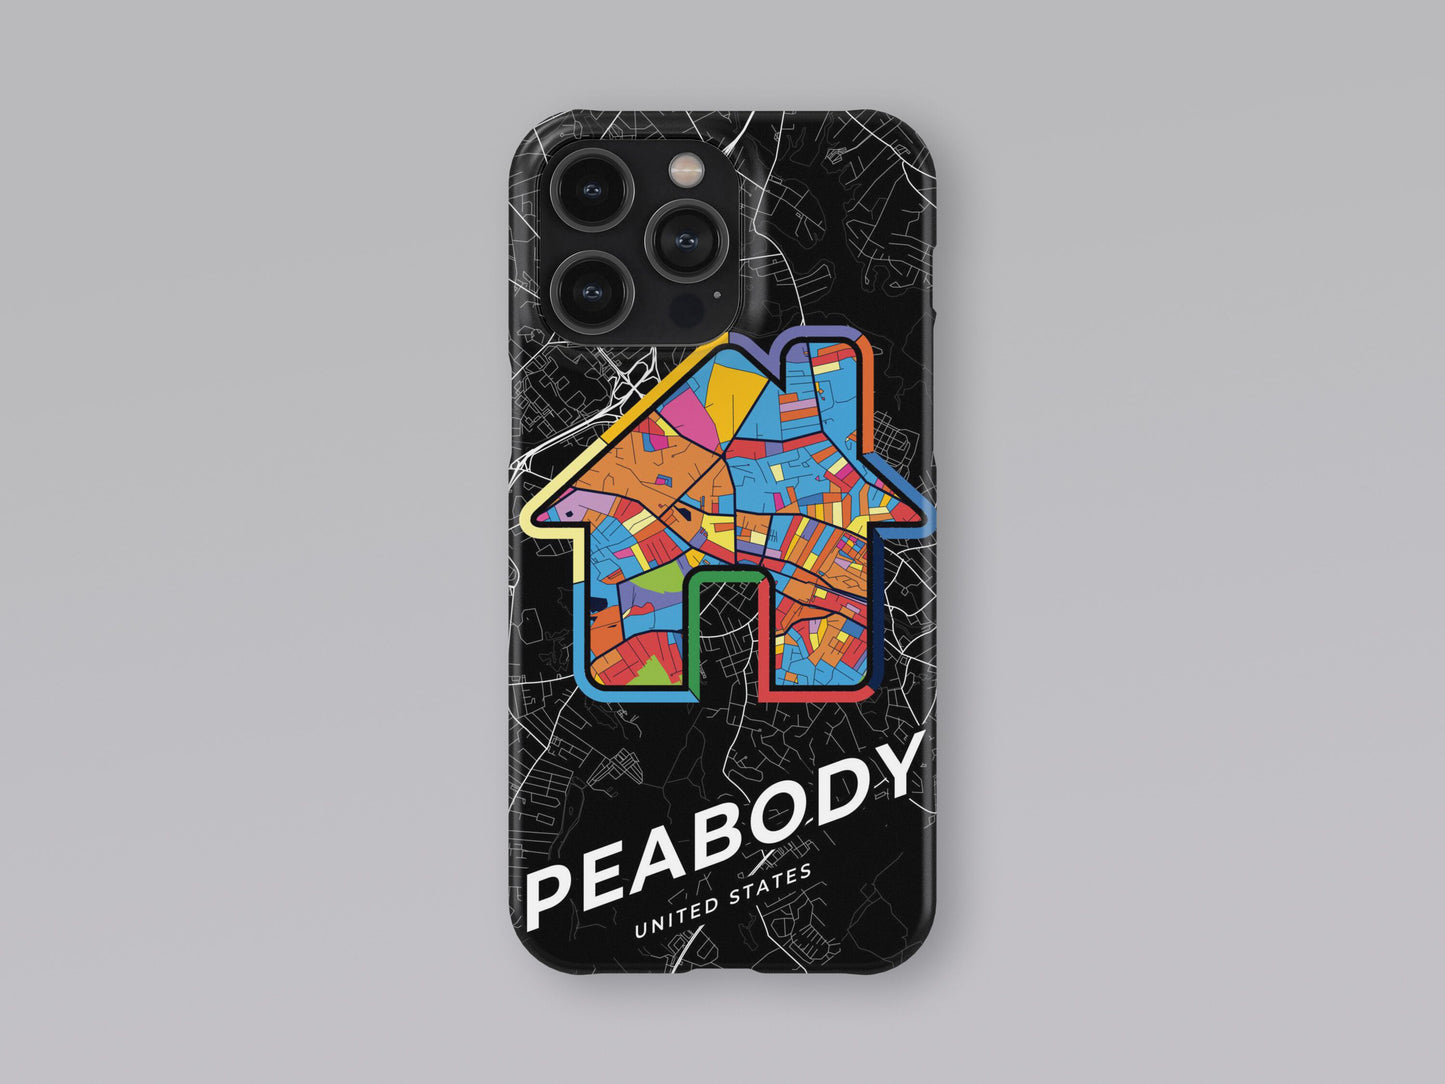 Peabody Massachusetts slim phone case with colorful icon 3